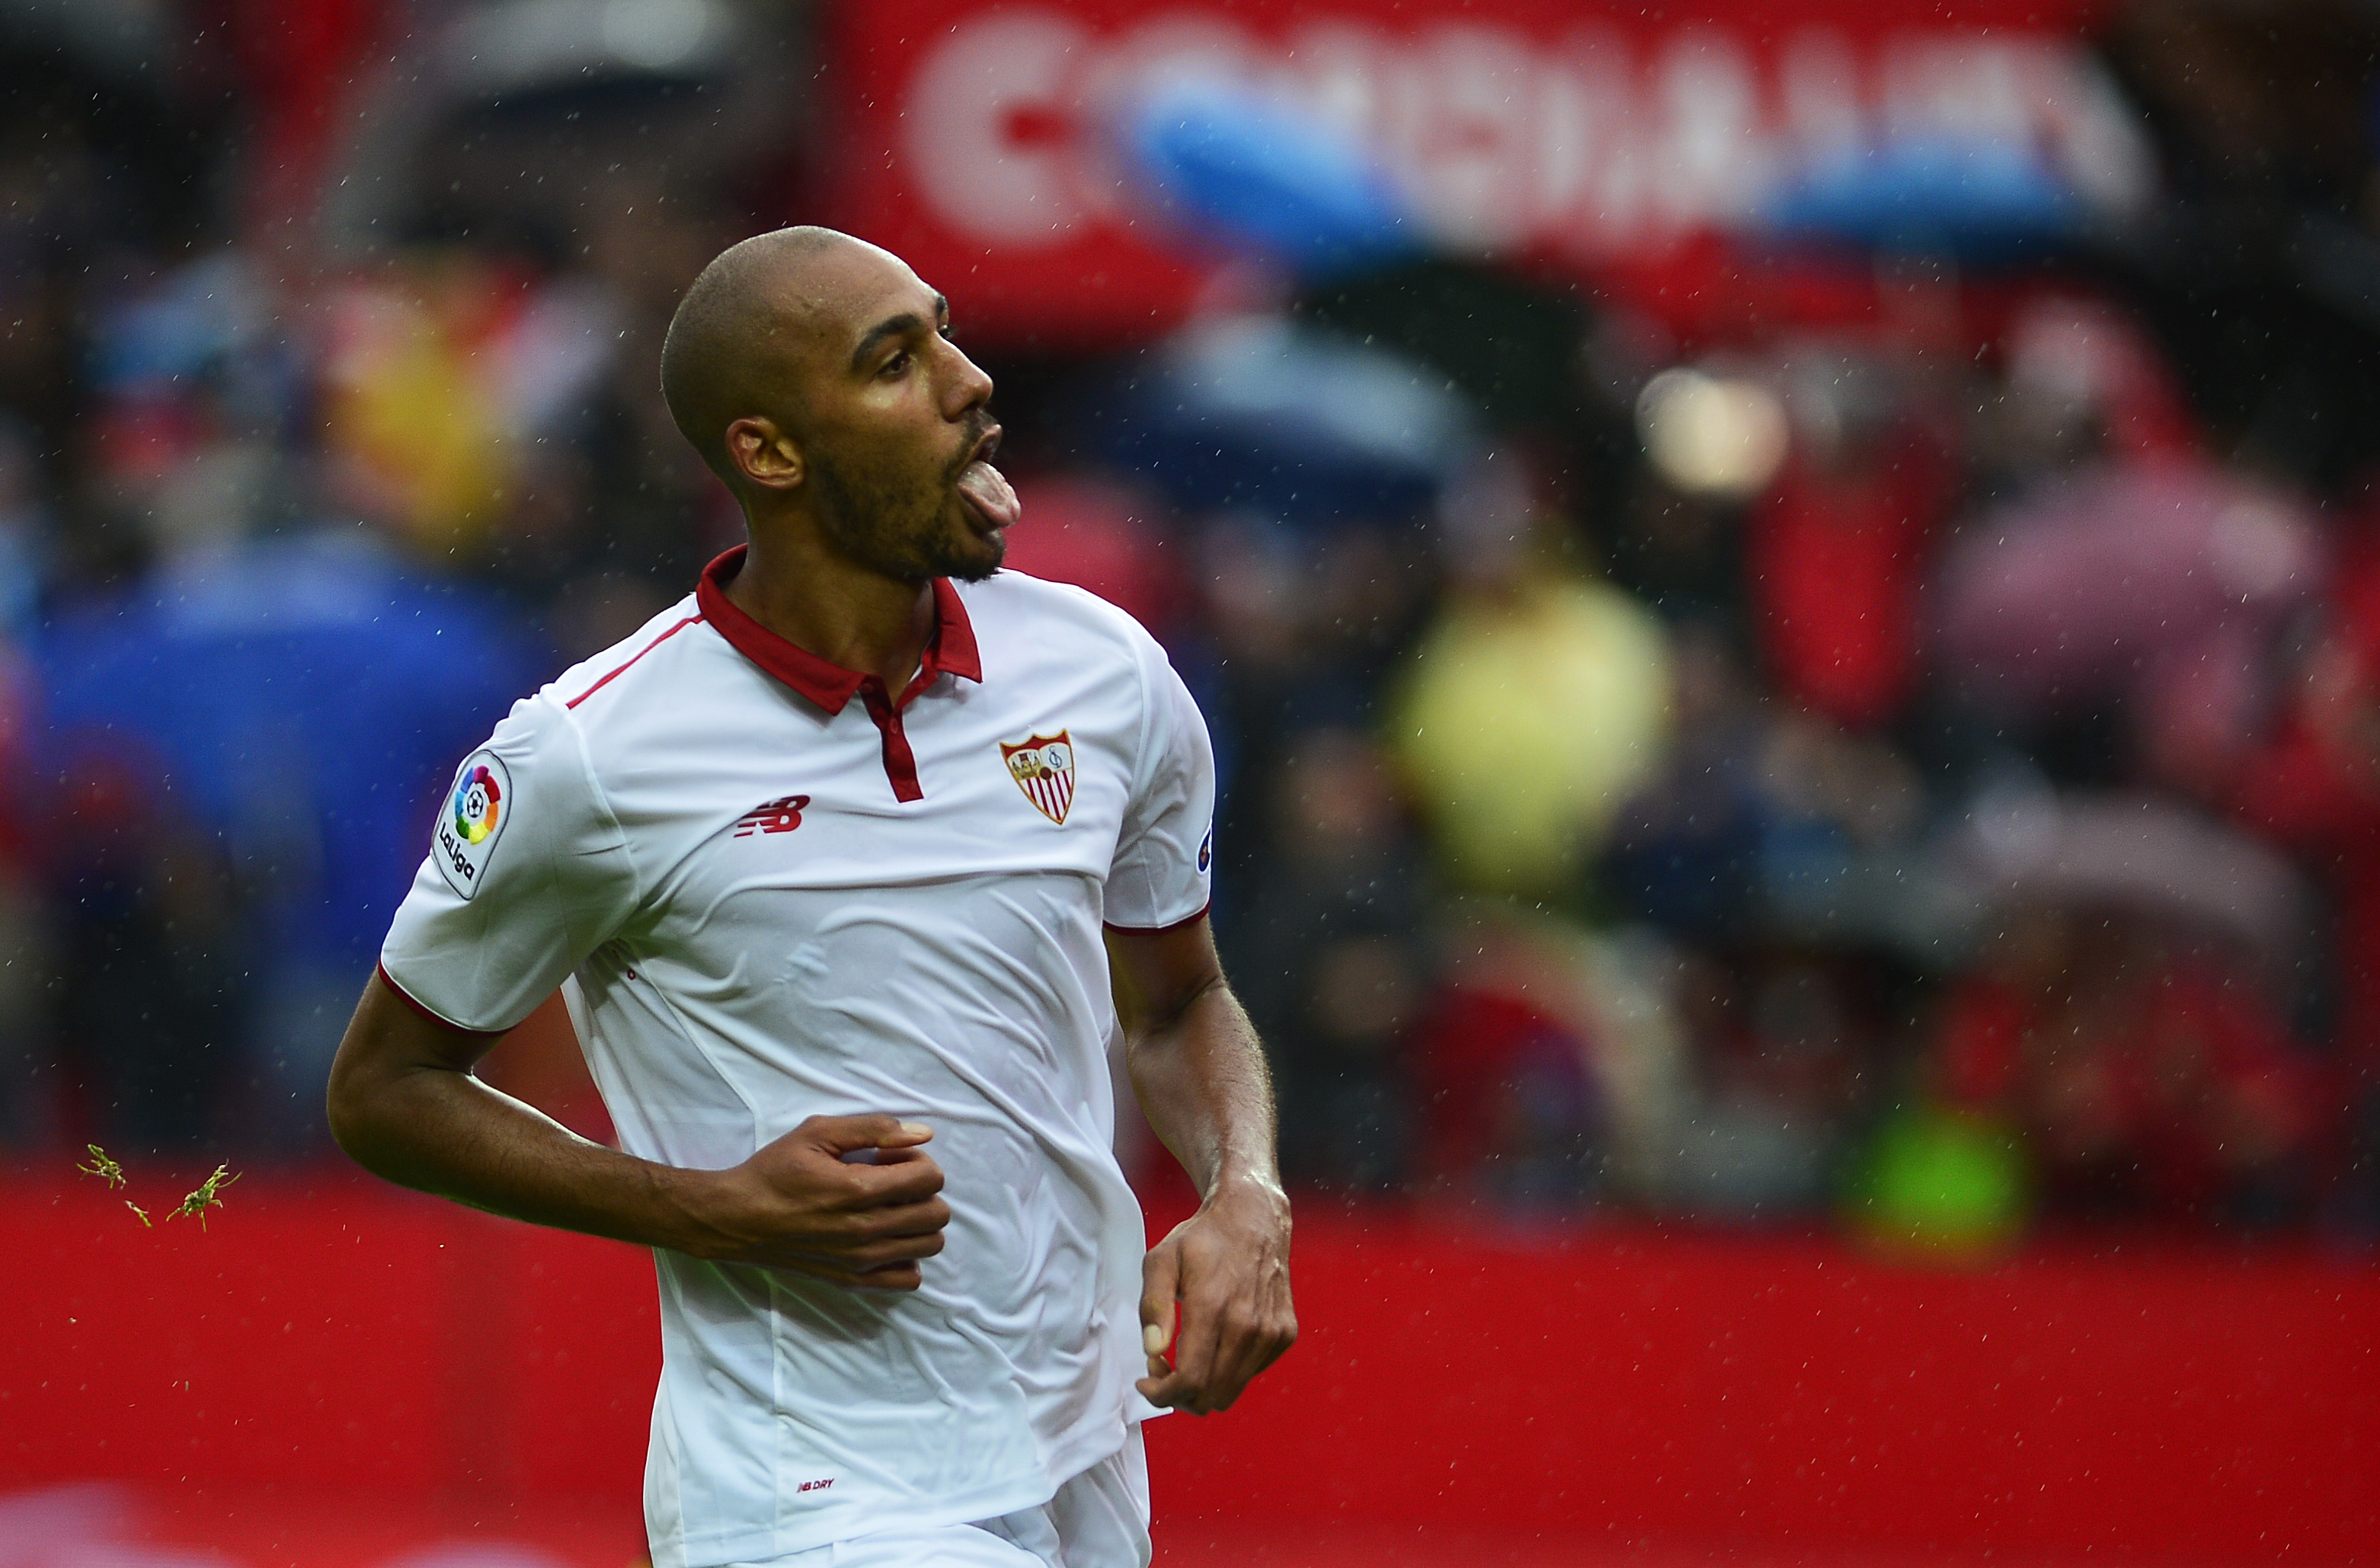 Sevilla's French midfielder Steven N'Zonzi celebrates a goal during the Spanish league football match between Sevilla FC and Club Atletico de Madrid at the Ramon Sanchez Pizjuan stadium in Sevilla on October 23, 2016. / AFP / CRISTINA QUICLER        (Photo credit should read CRISTINA QUICLER/AFP/Getty Images)